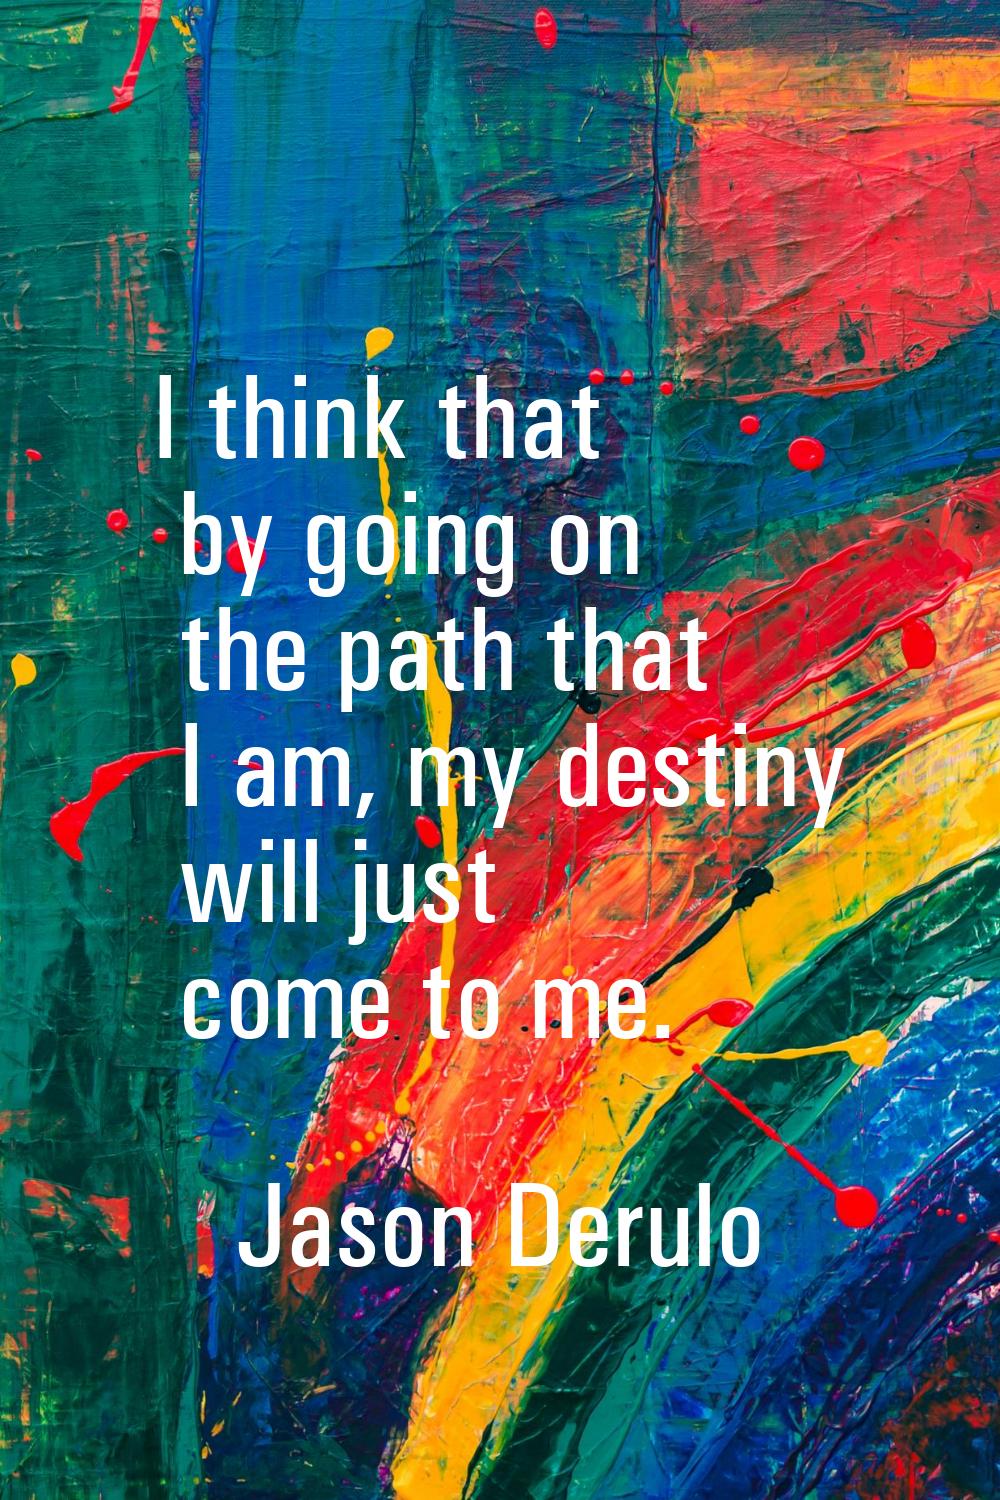 I think that by going on the path that I am, my destiny will just come to me.